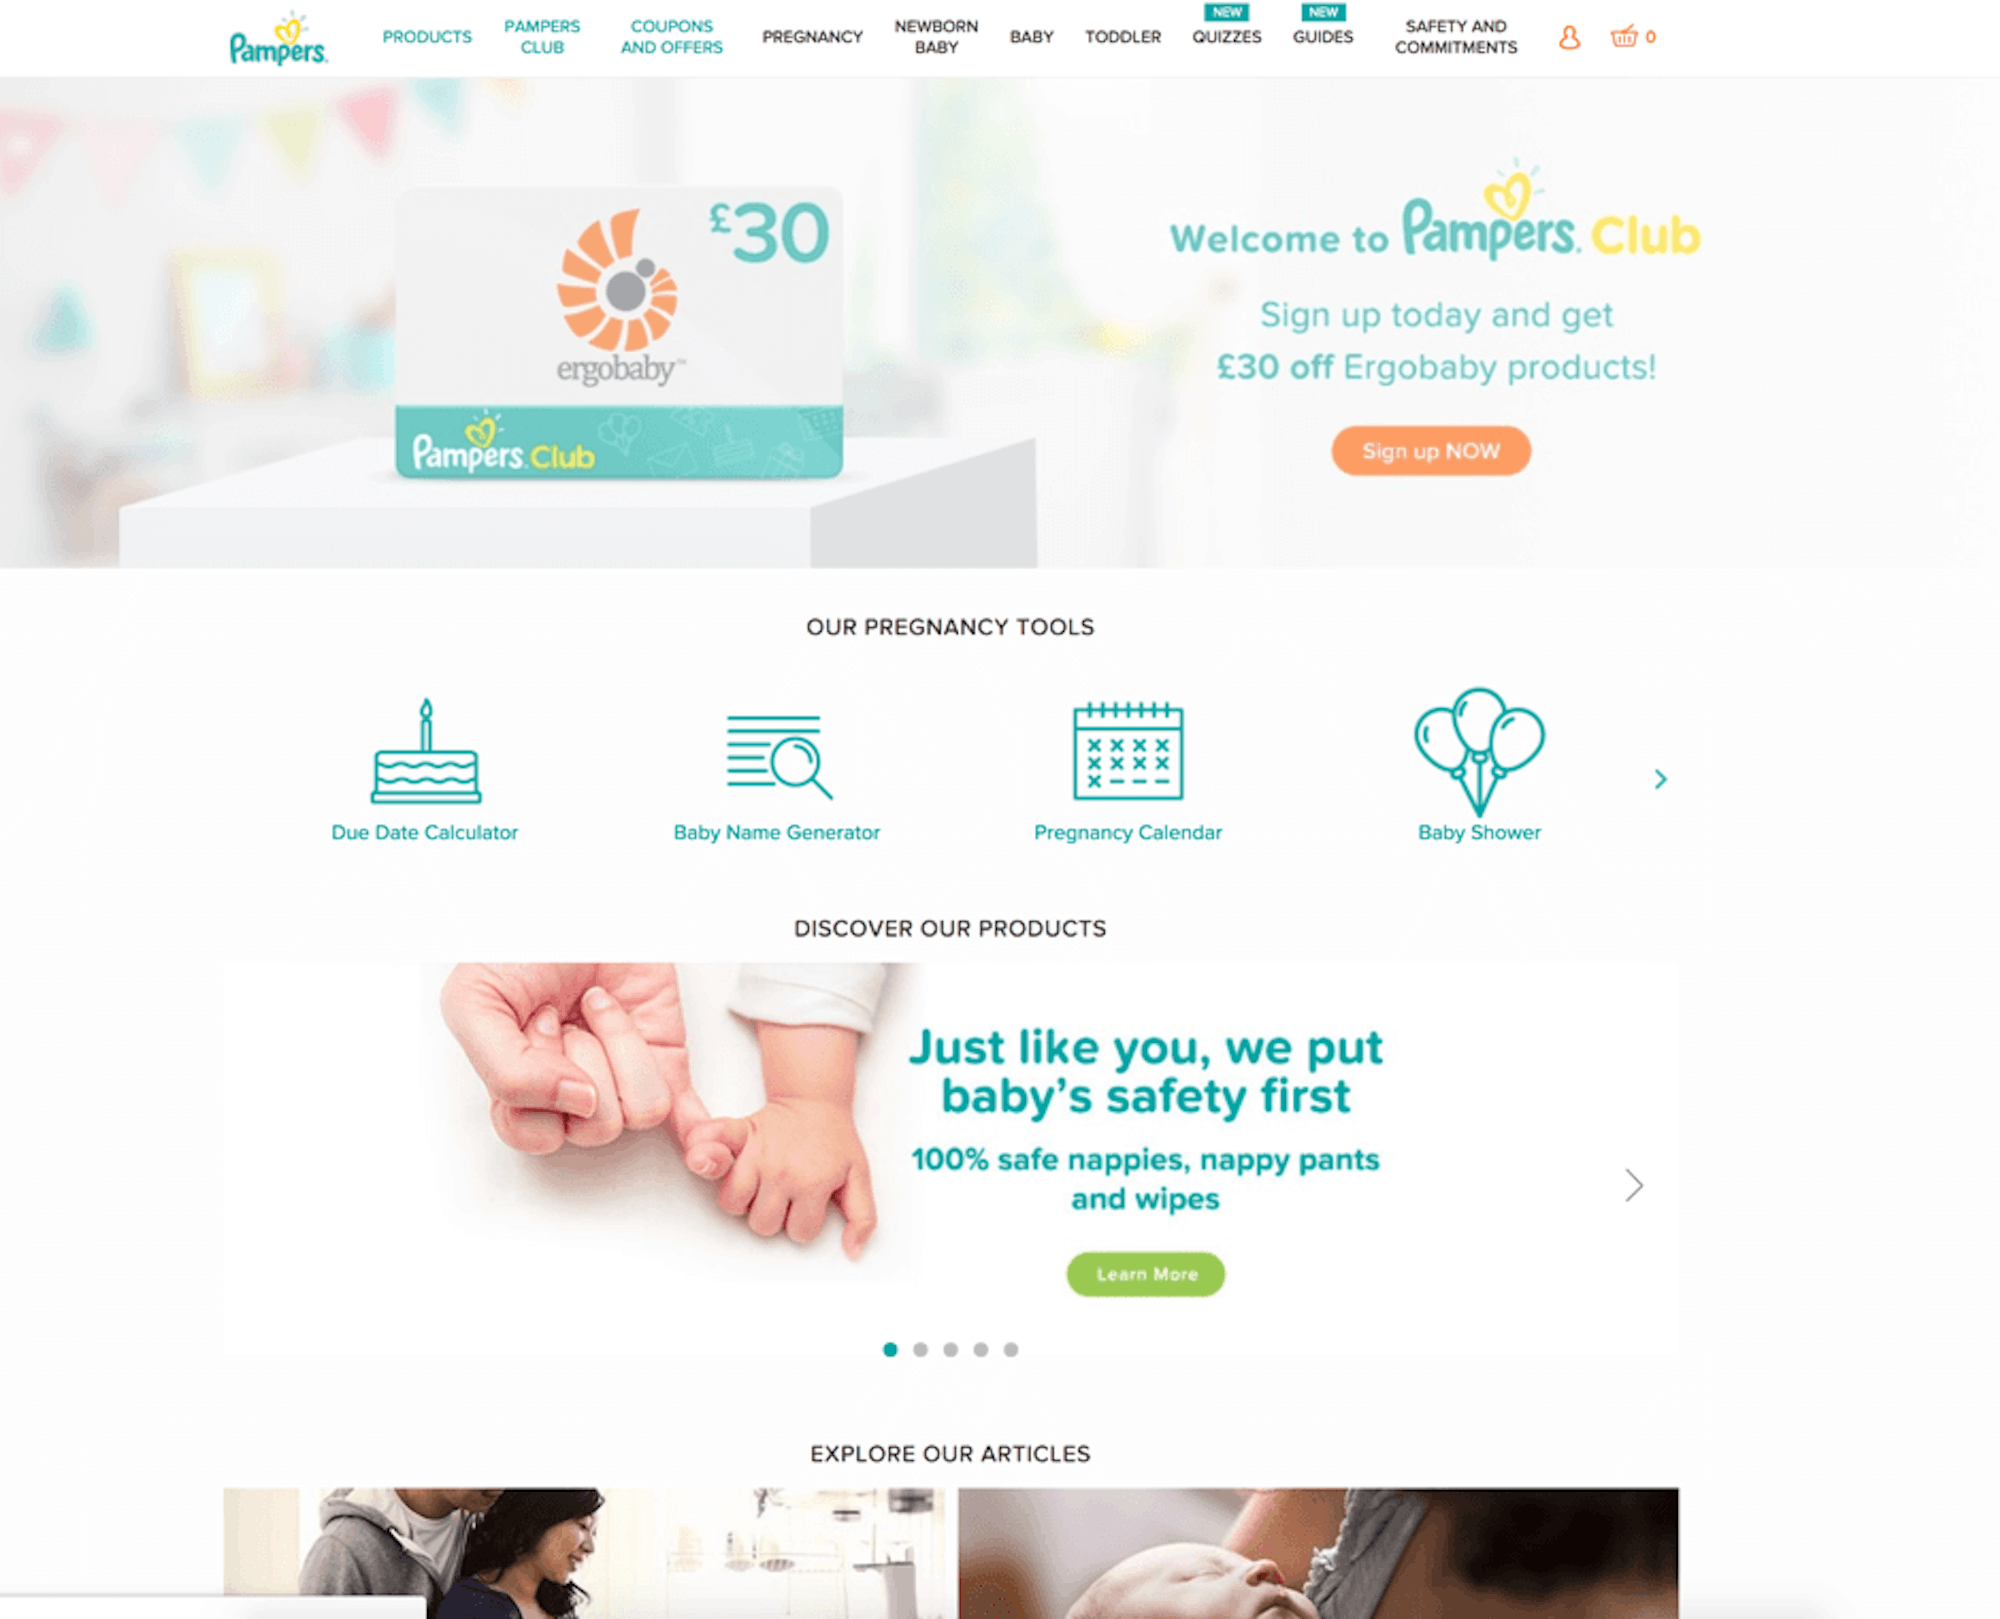 Pampers' home page. Displays recent activity in two separate ways. An active campaign/offer in the banner and recent articles just above the fold of the page.